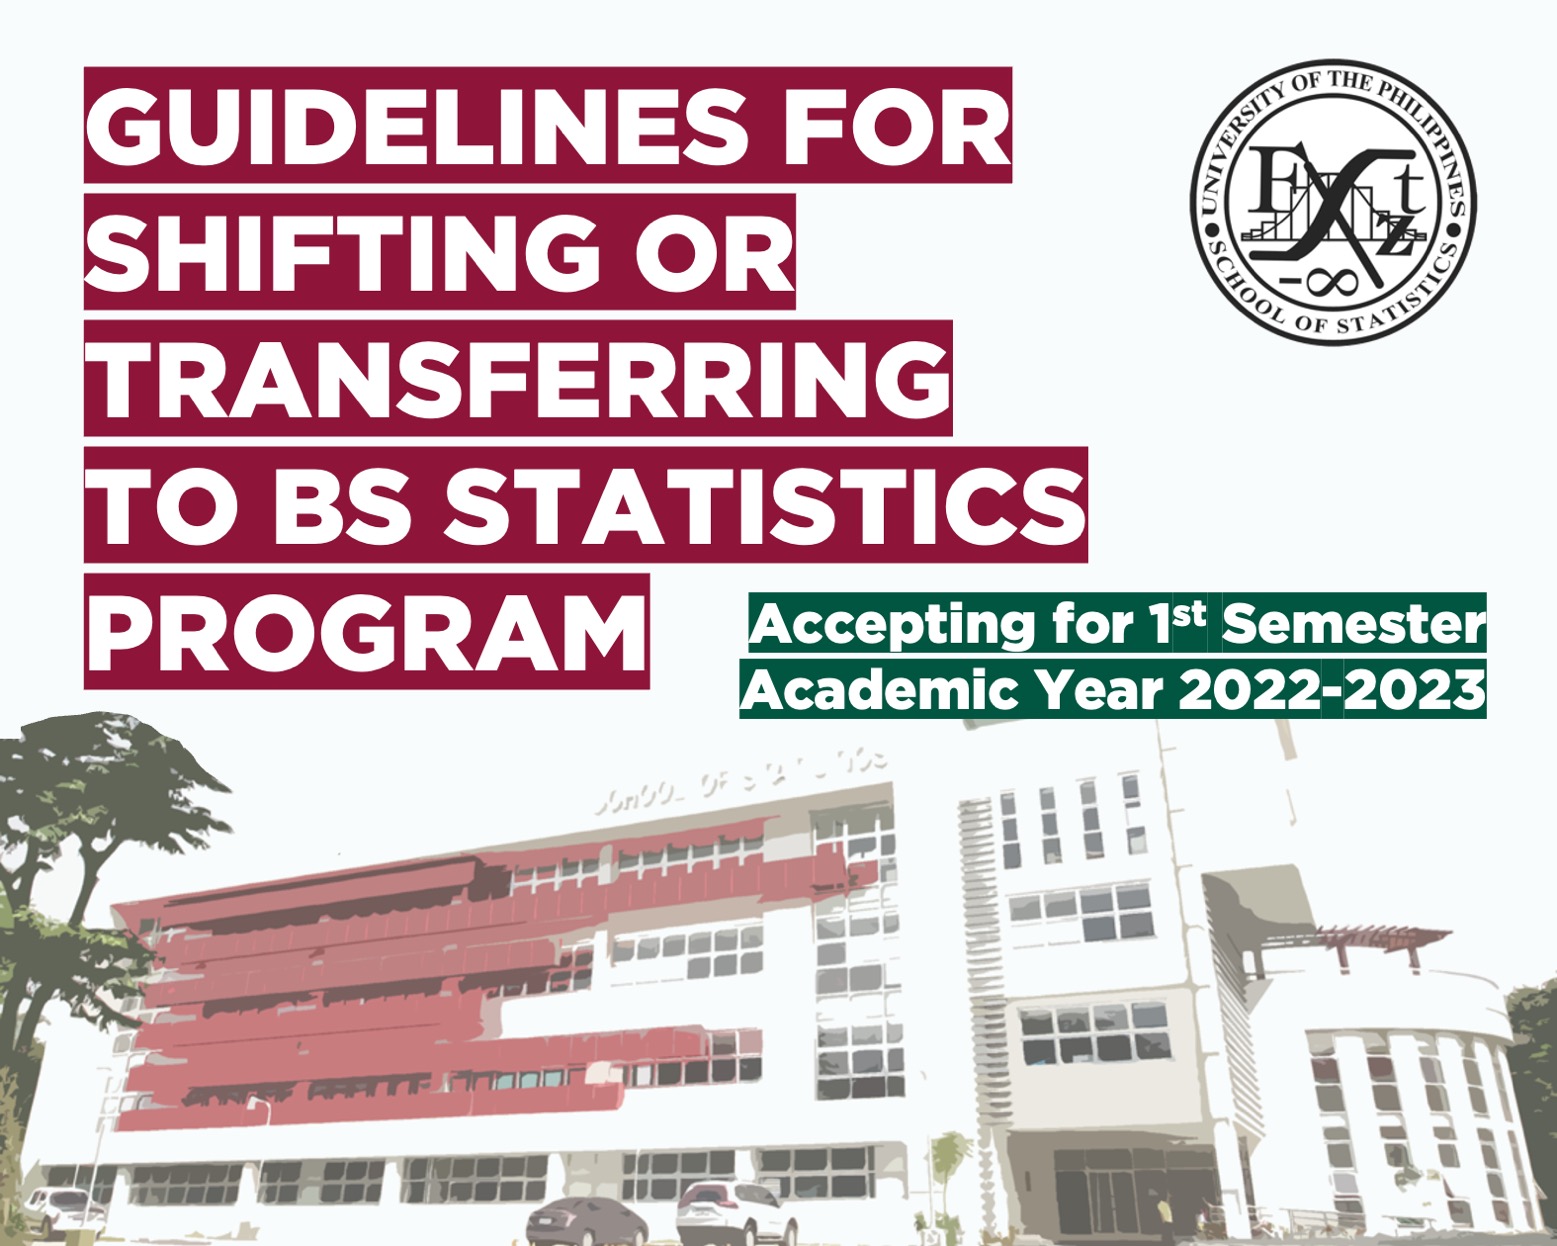 Image for Guidelines for Shifting or Transferring to BS Statistics Program (1st Semester, AY 2022-2023)